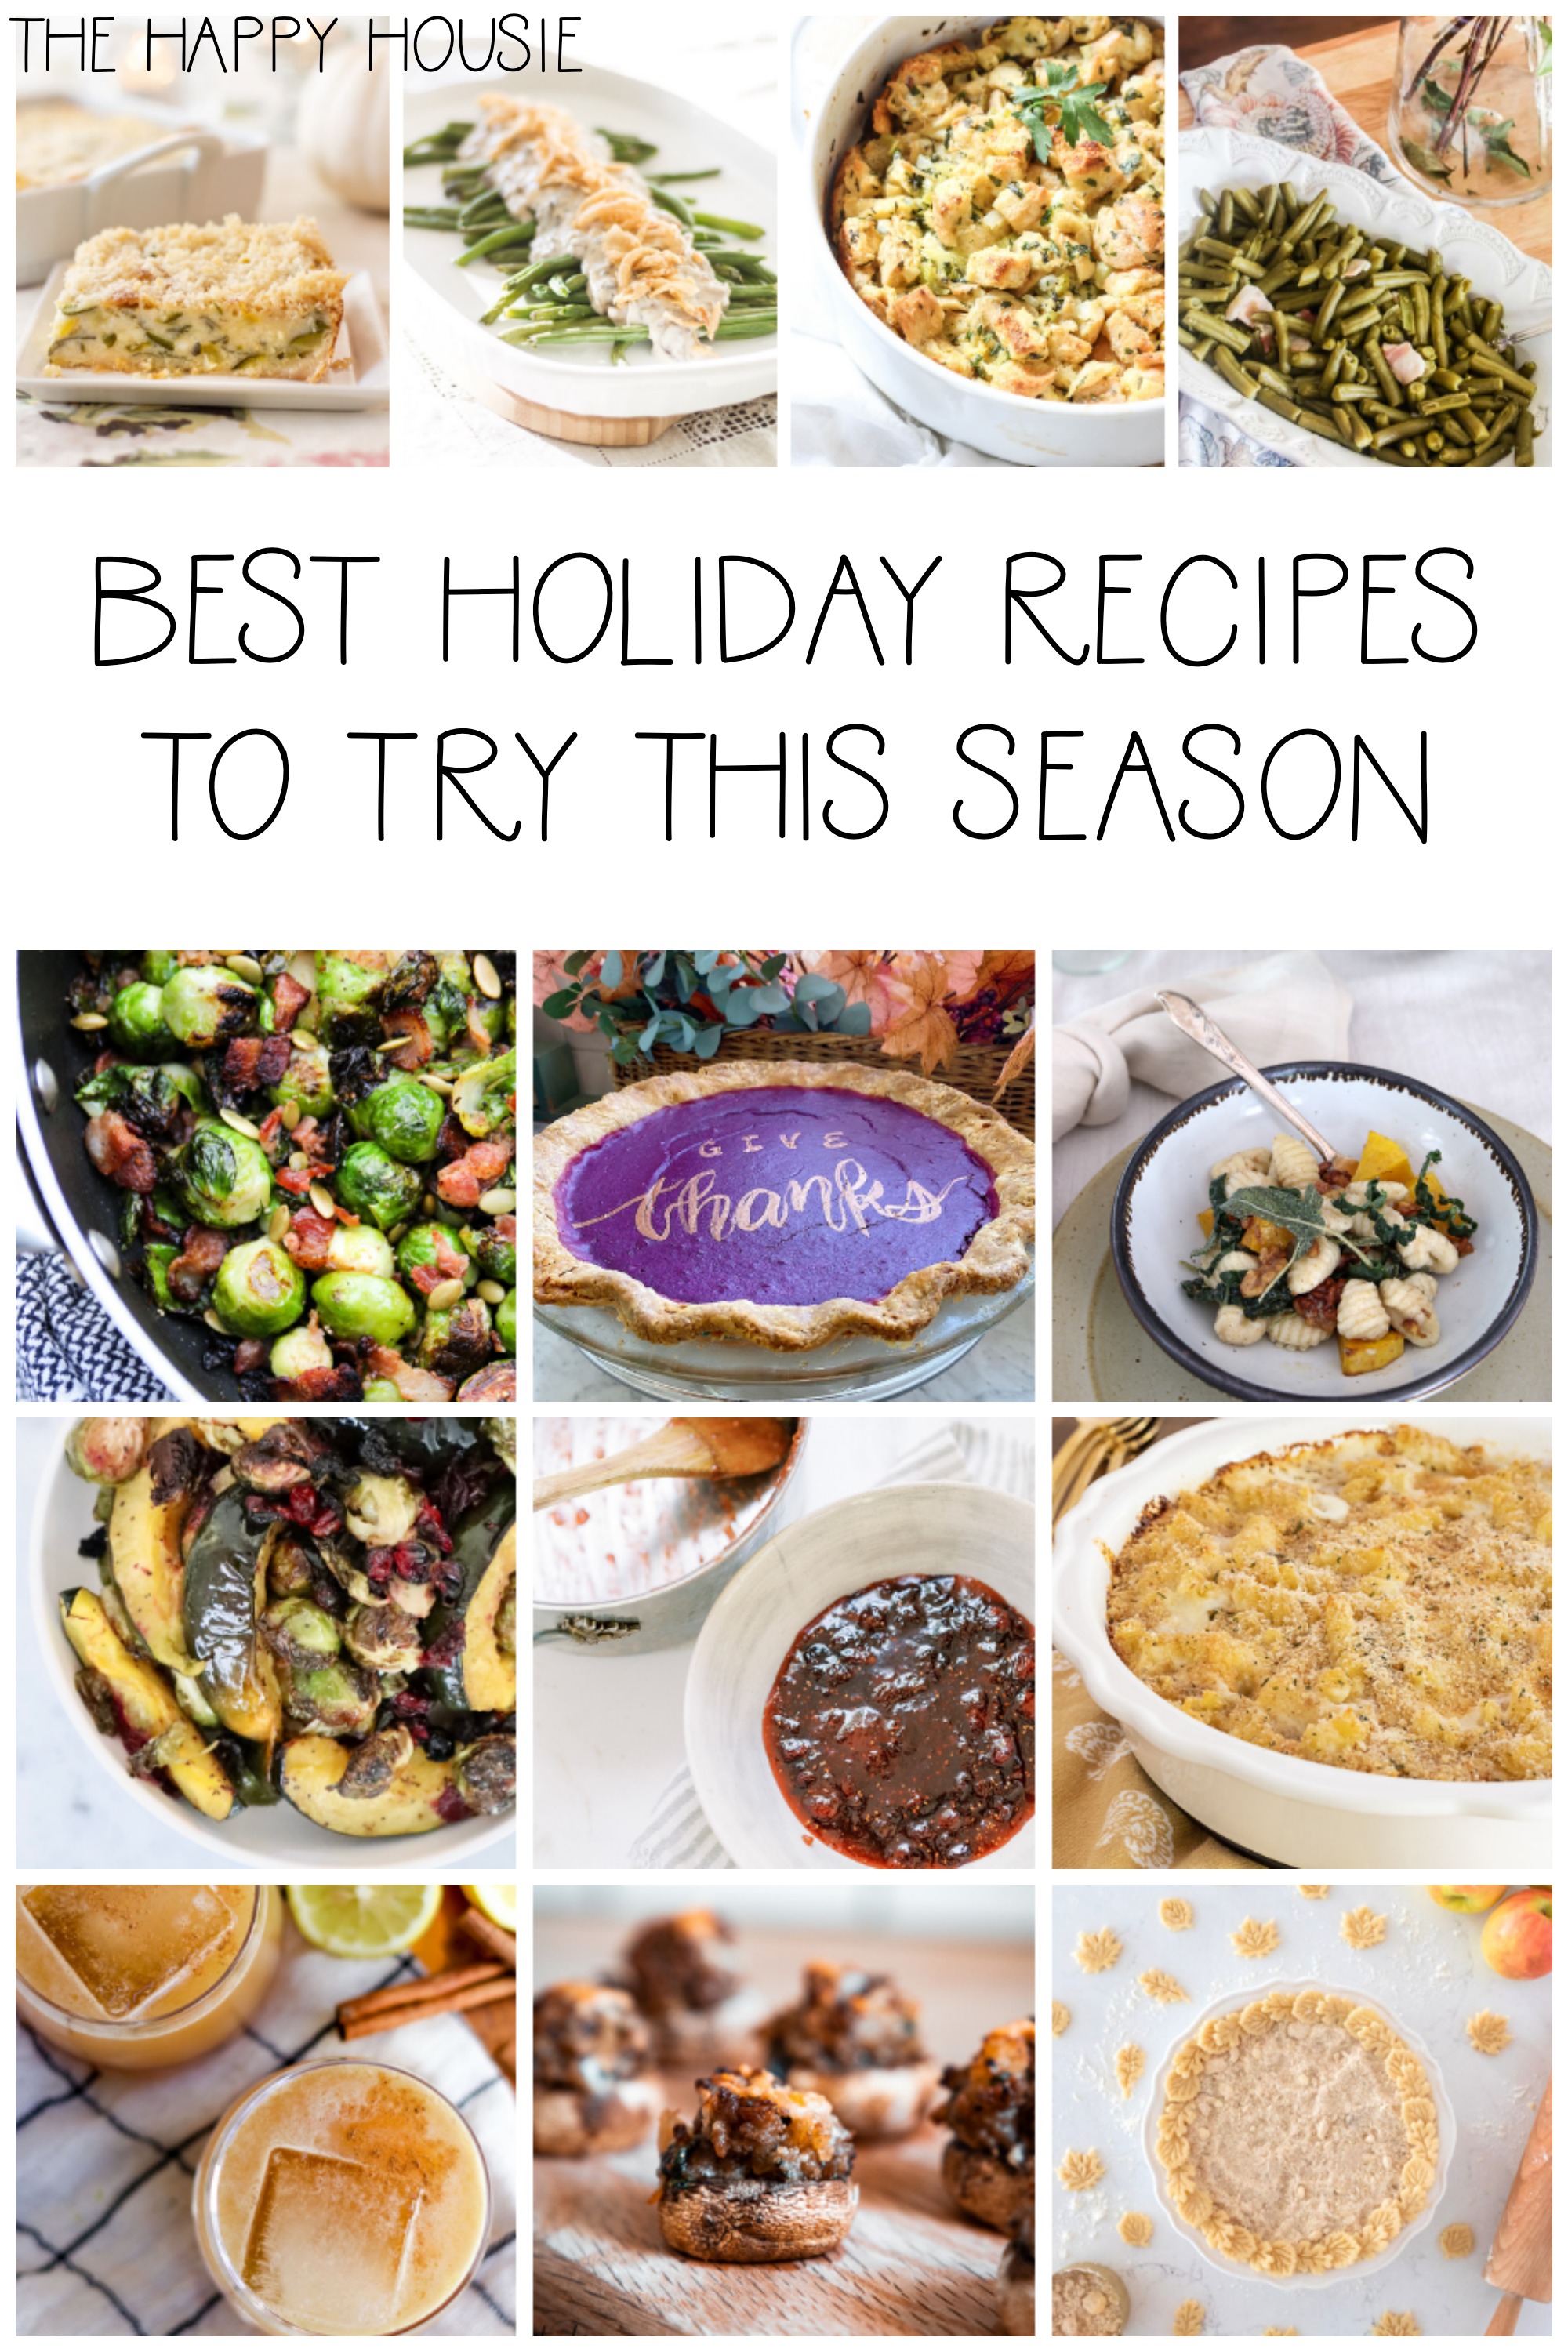 Best Holiday Recipes To Try This Season graphic.